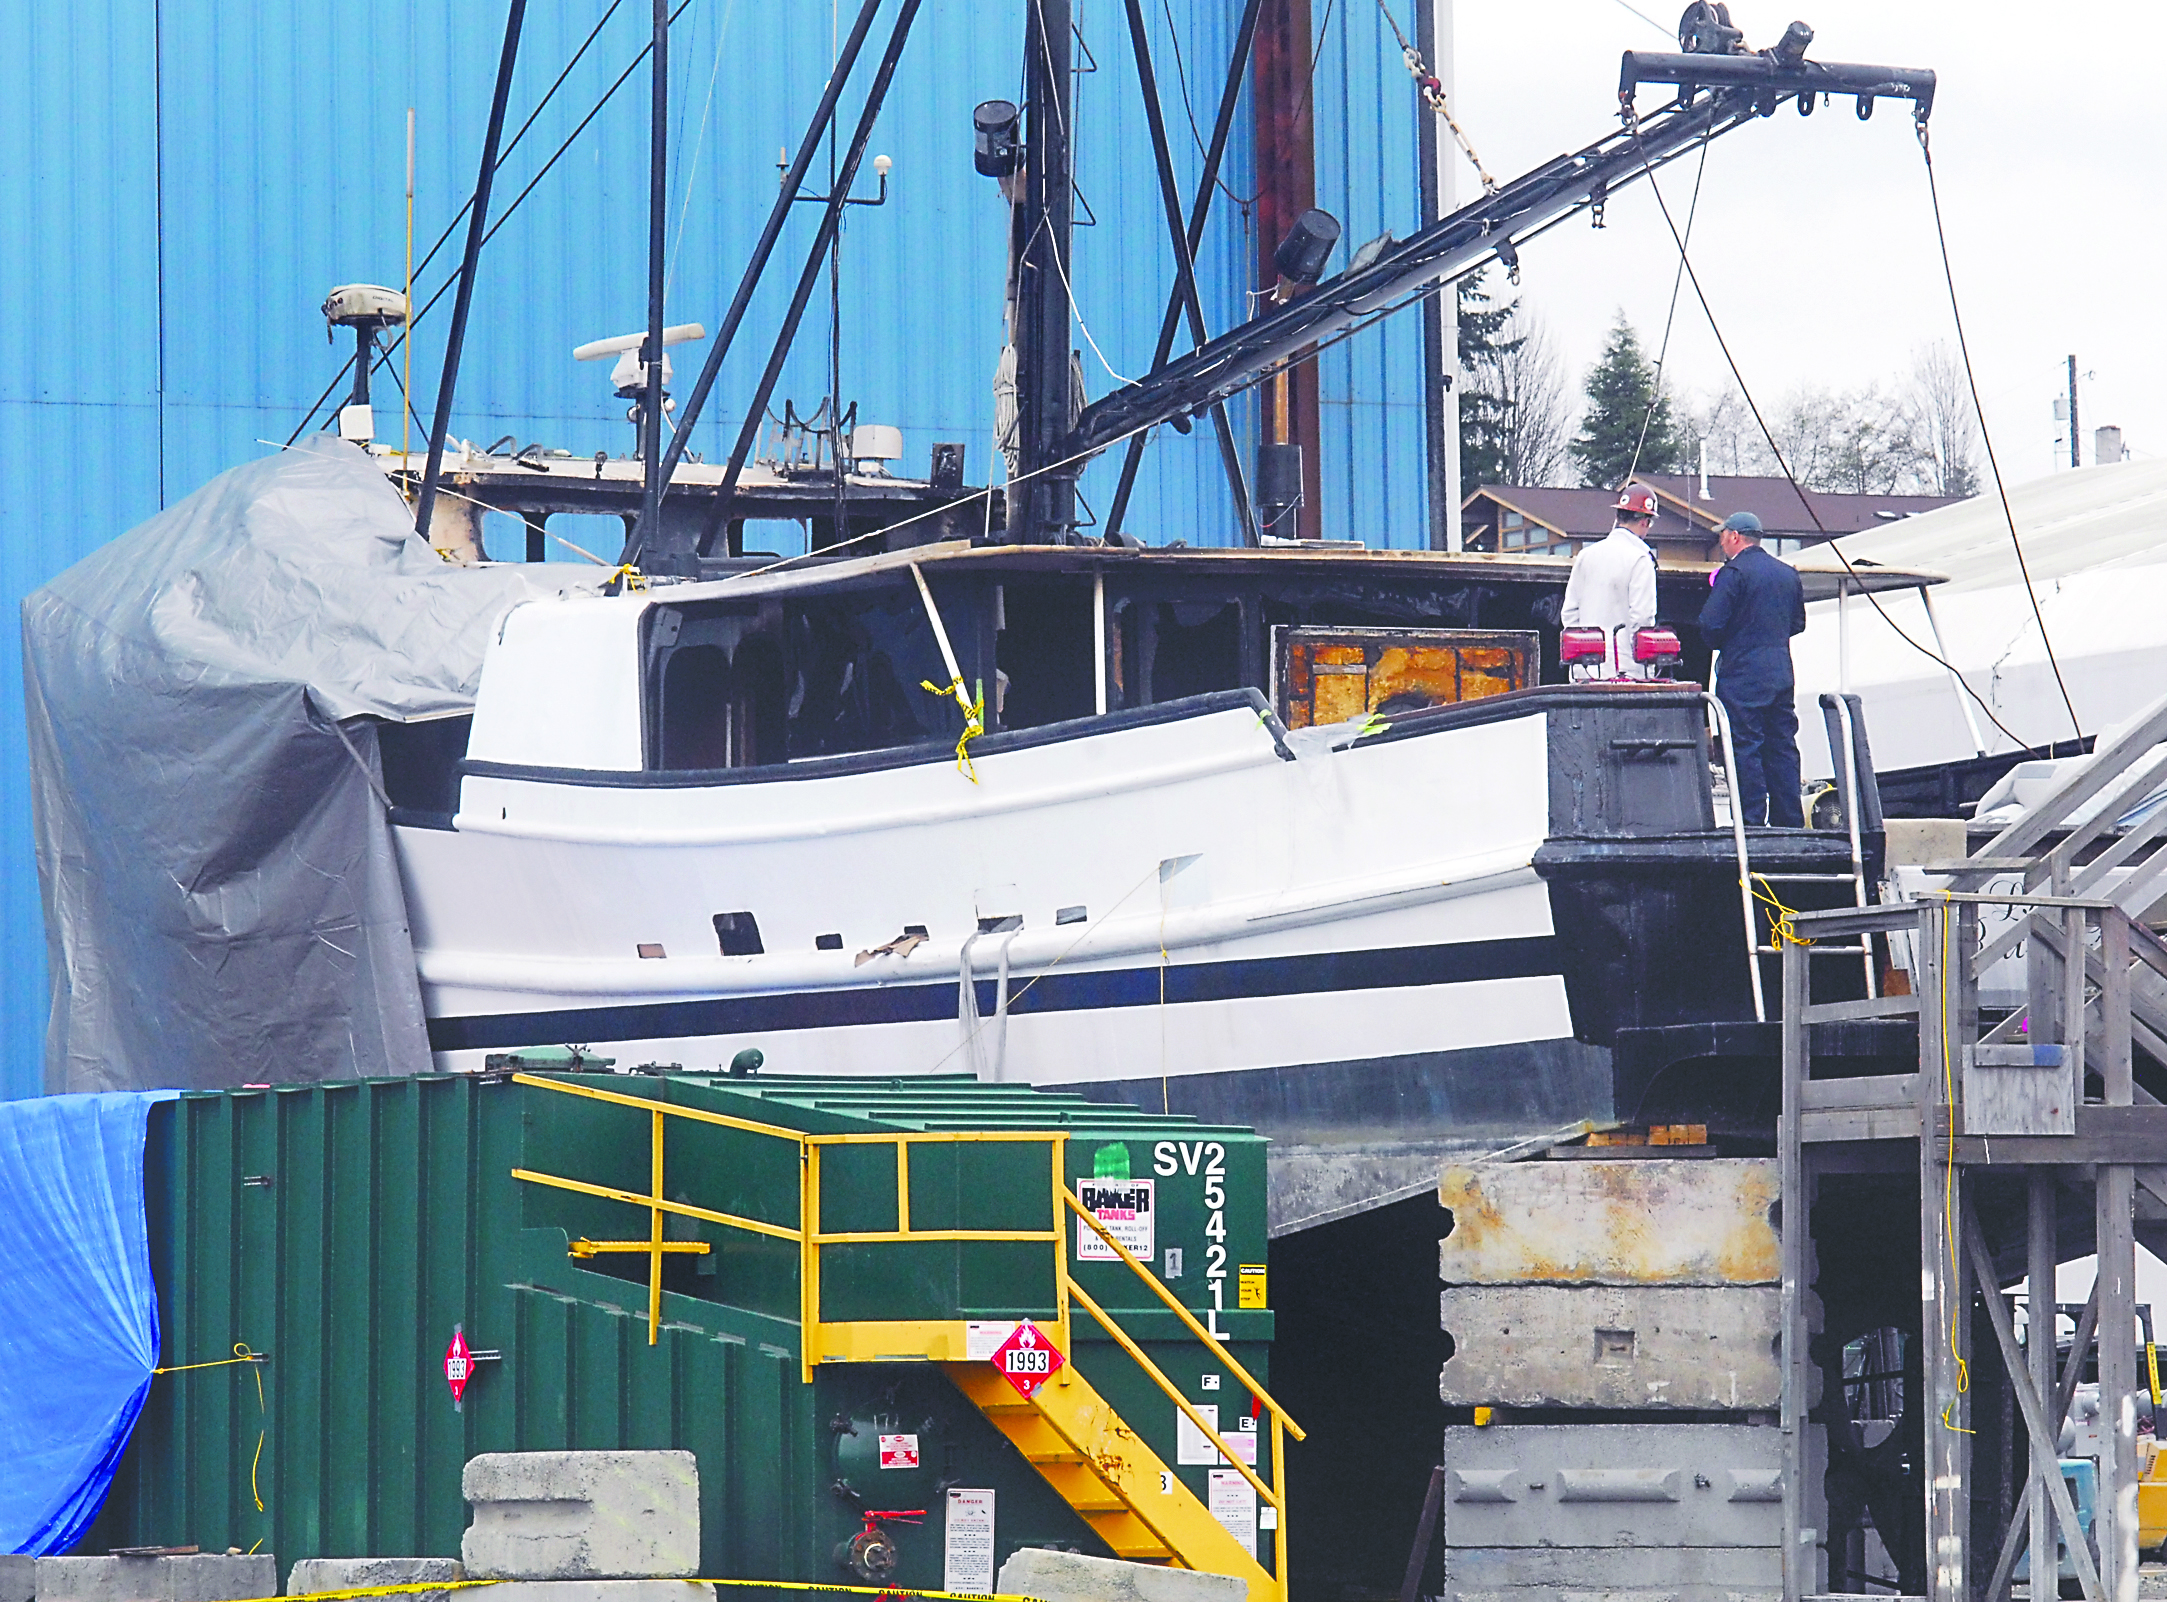 Personnel inspect the damage aboard La Rata Bastarda in the Platypus Marine yard on Tuesday.  -- Photo by Keith Thorpe/Peninsula Daily News